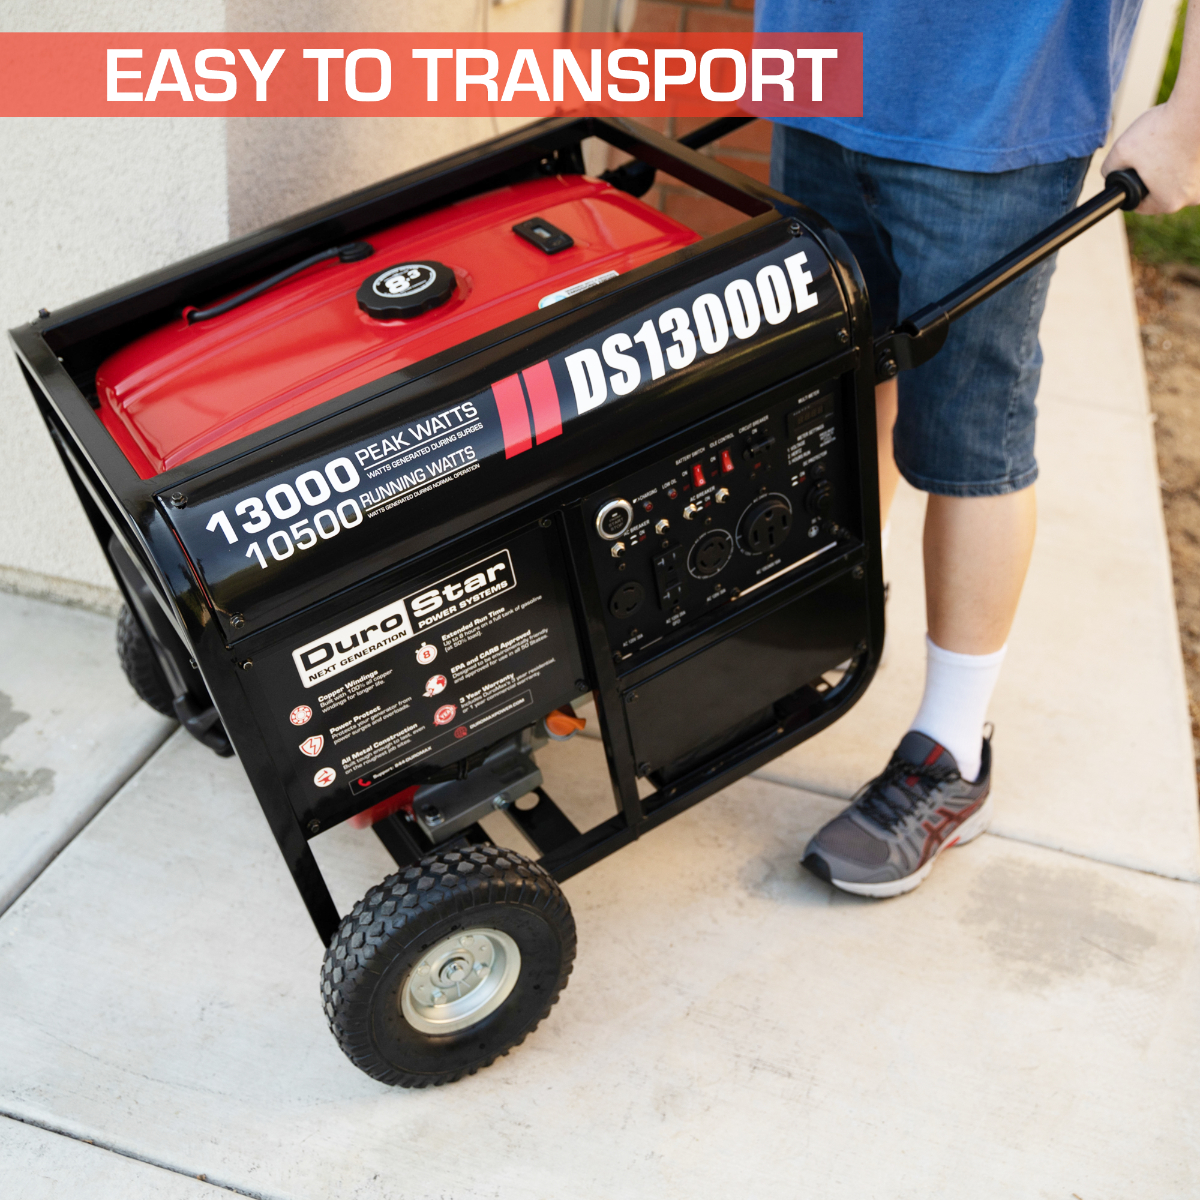 DuroMax / DuroStar DS13000E 10500W/13000W Electric Start Gas Generator New (Red Version of XP13000E)